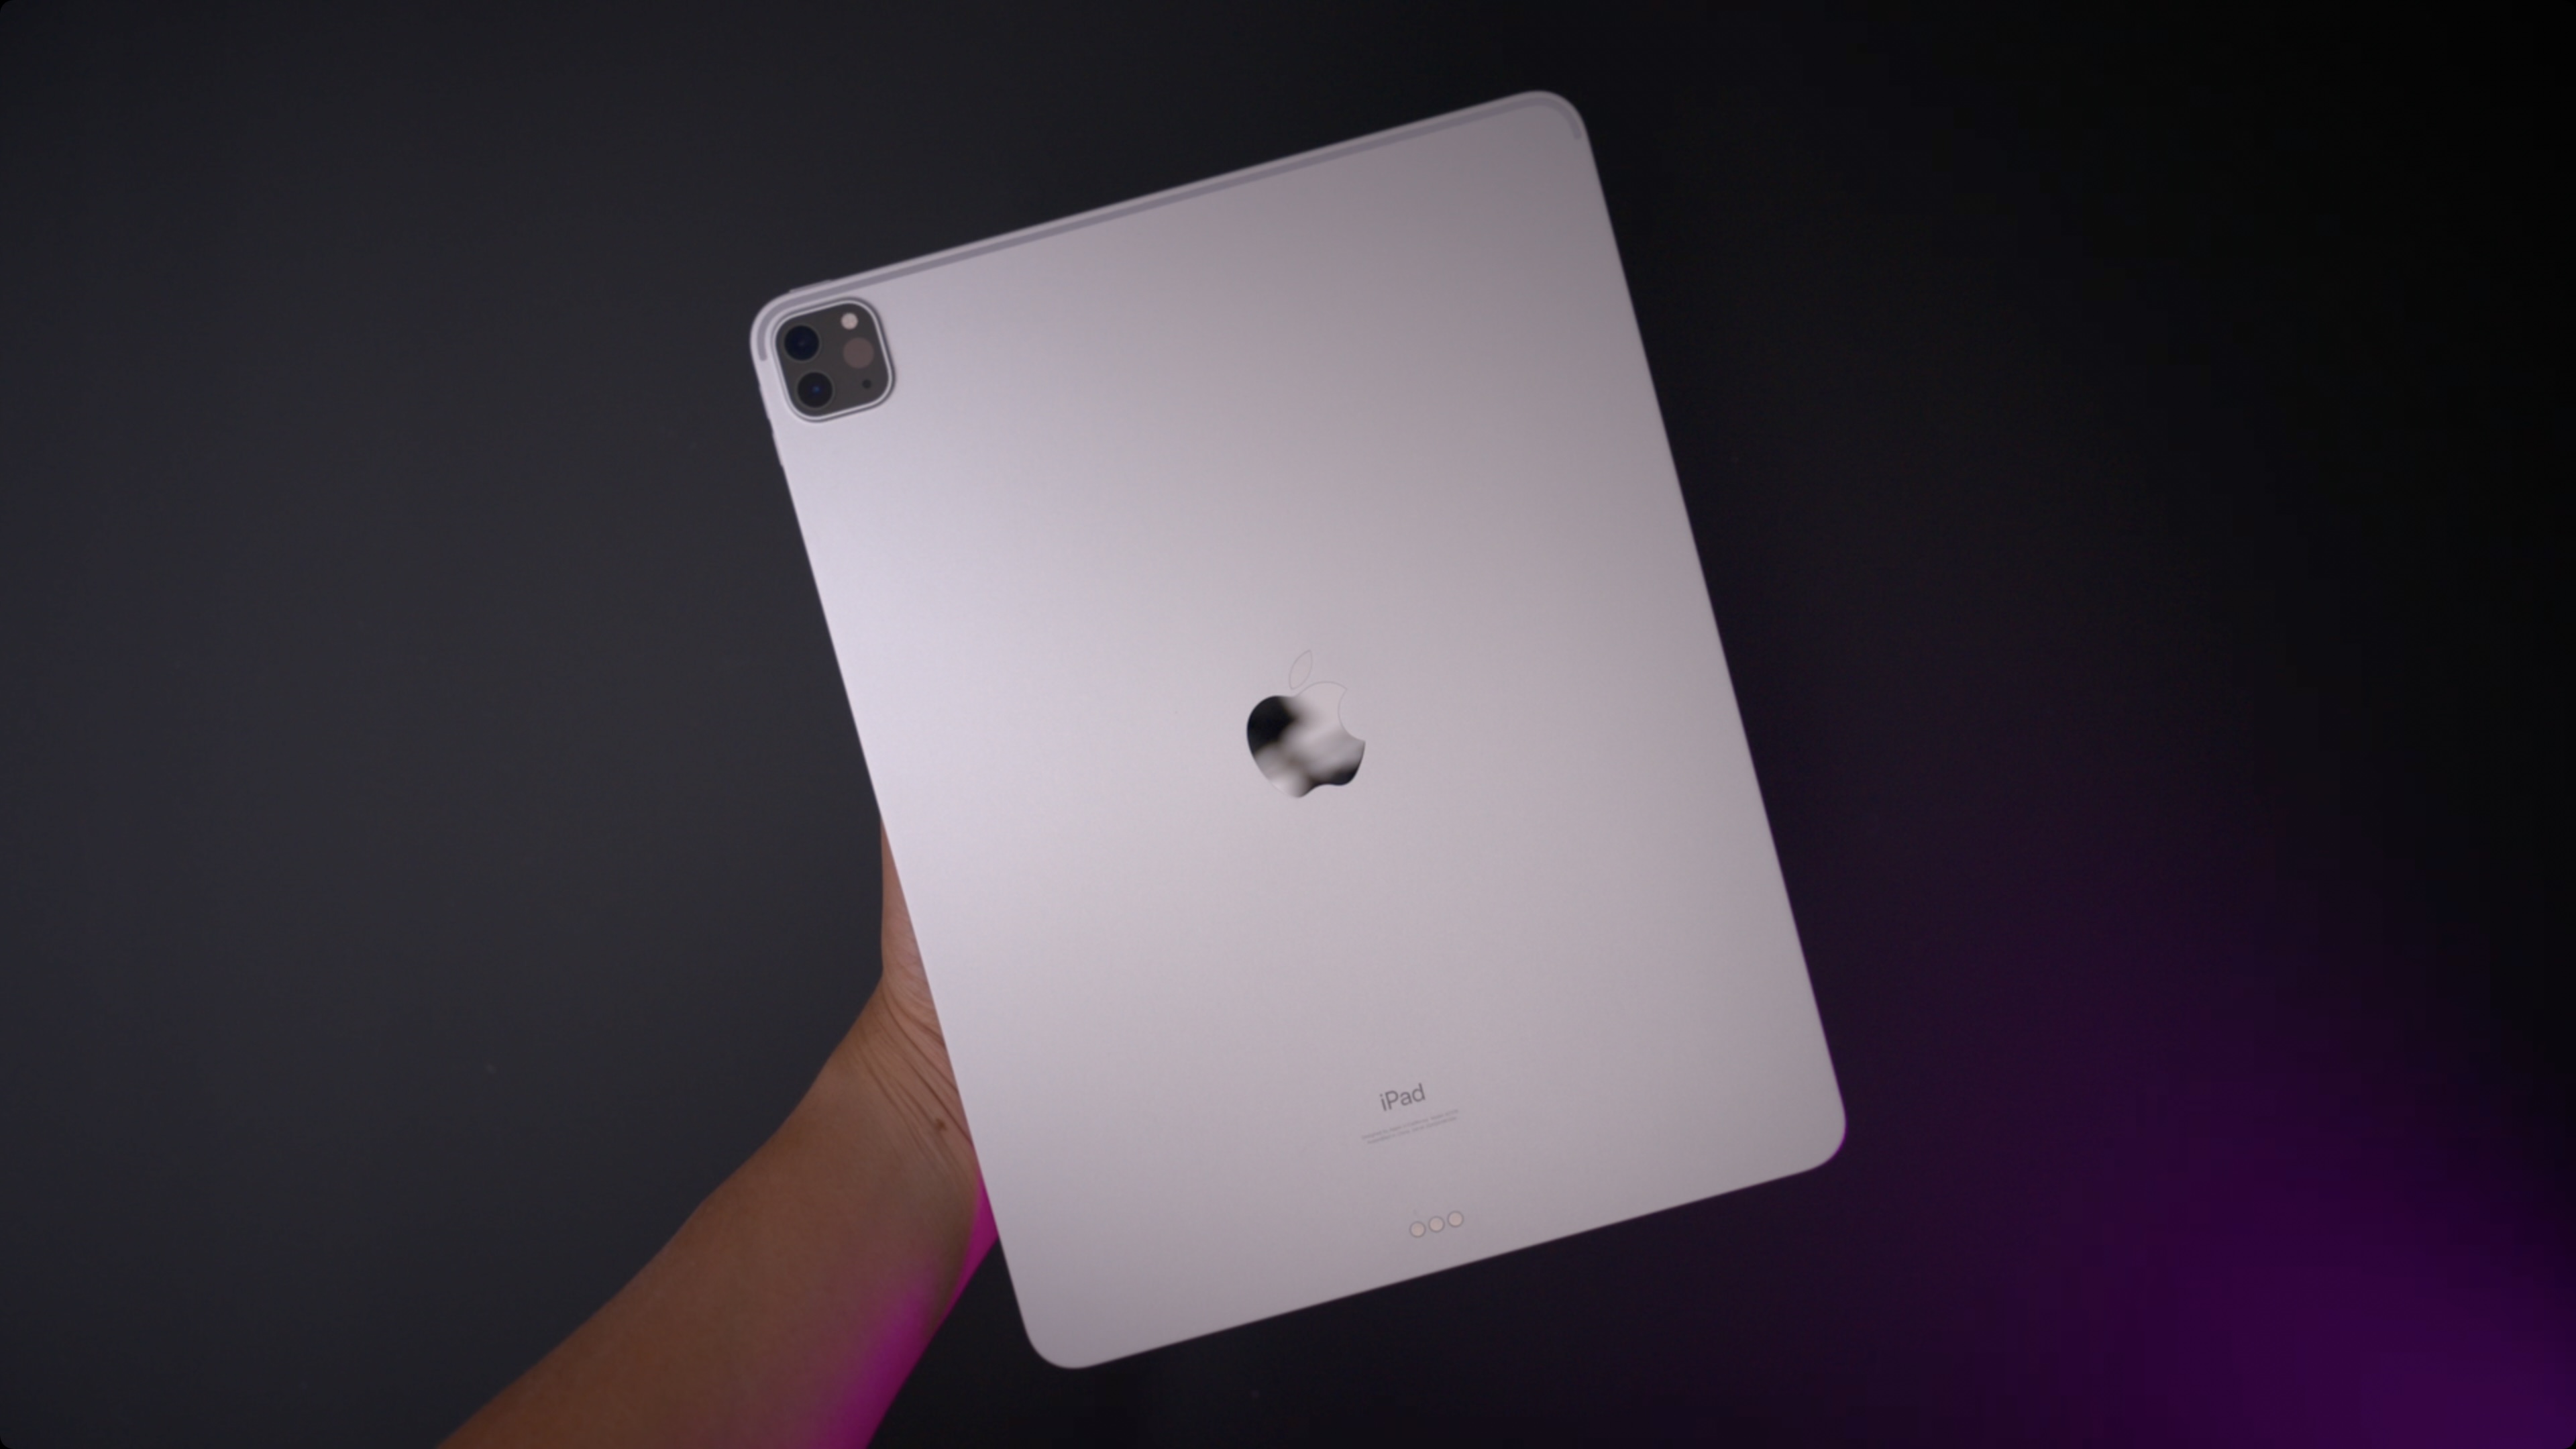 iPad Pro History, specs, pricing, review, deals, and rumors 9to5Mac